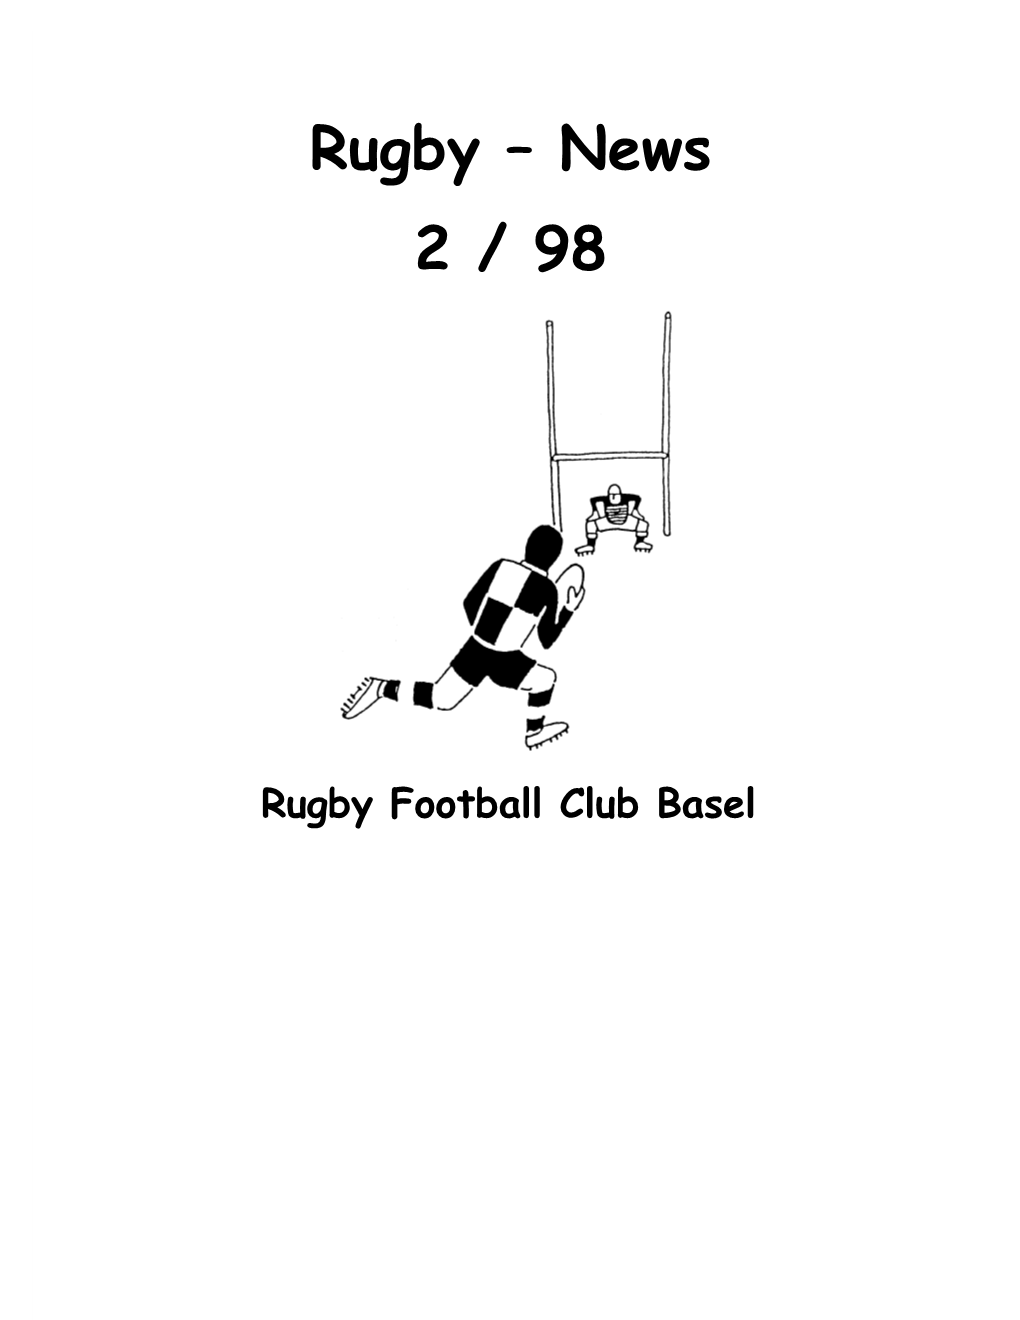 Rugby ² News 2 / 98